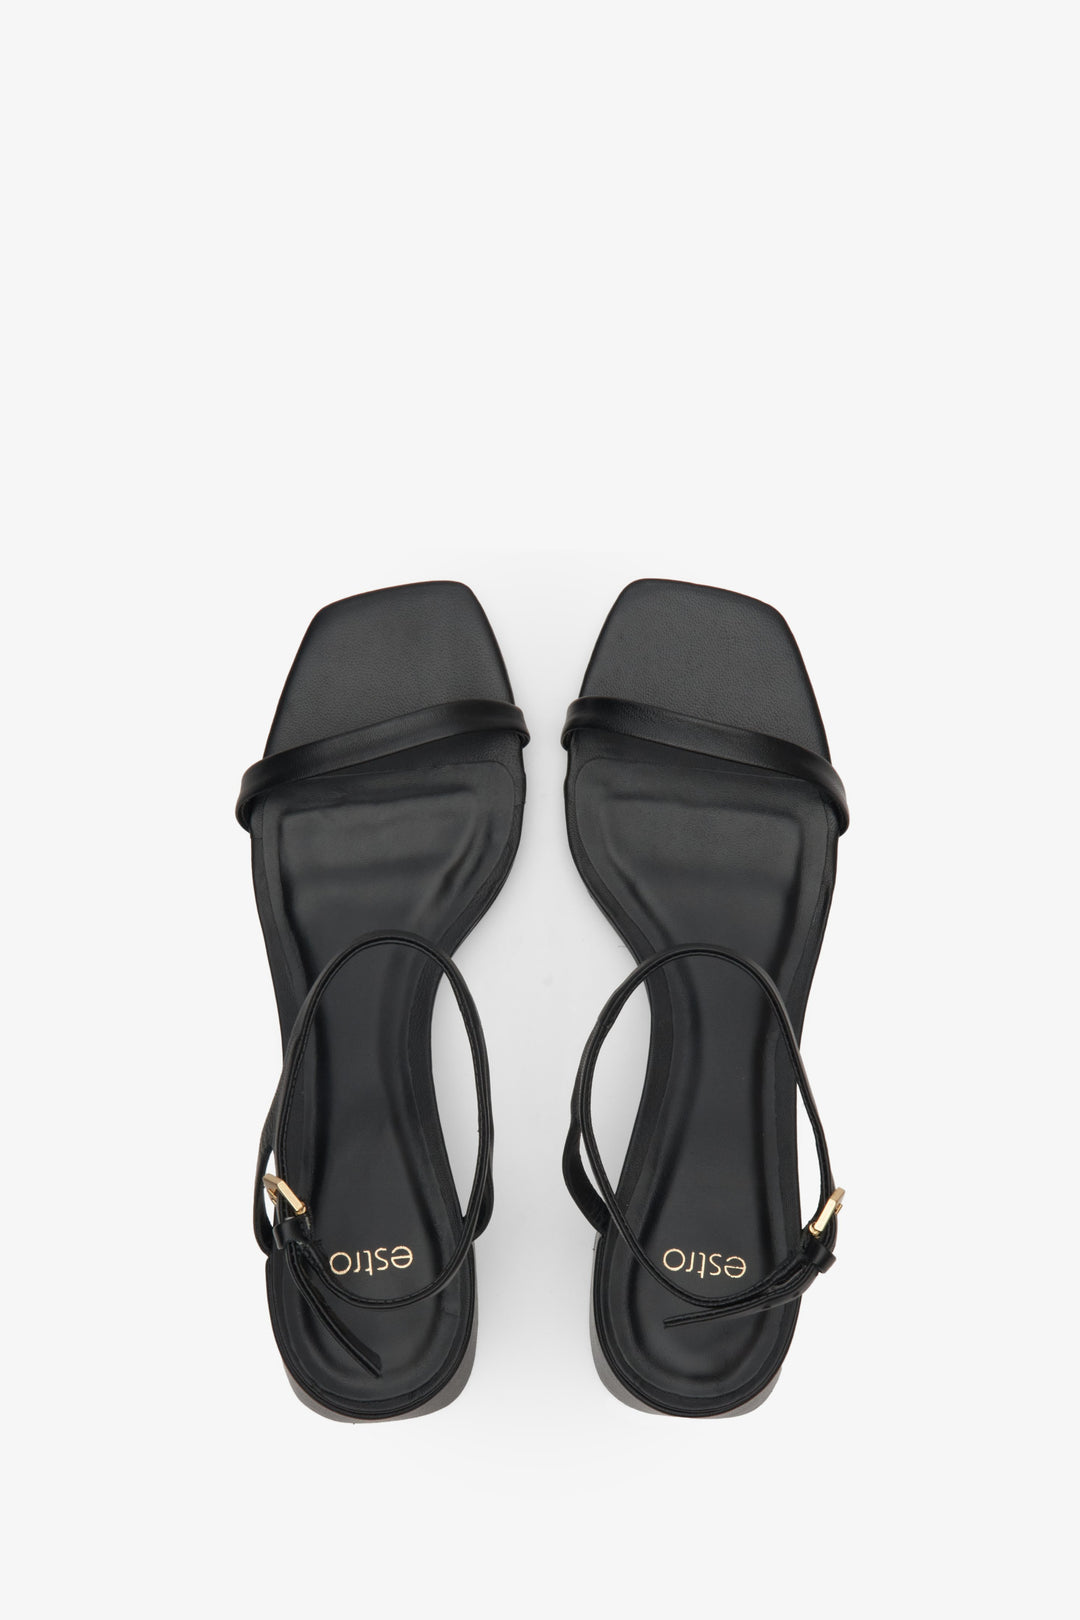 Women's black sandals made of genuine leather by Estro - top view presentation of the model.